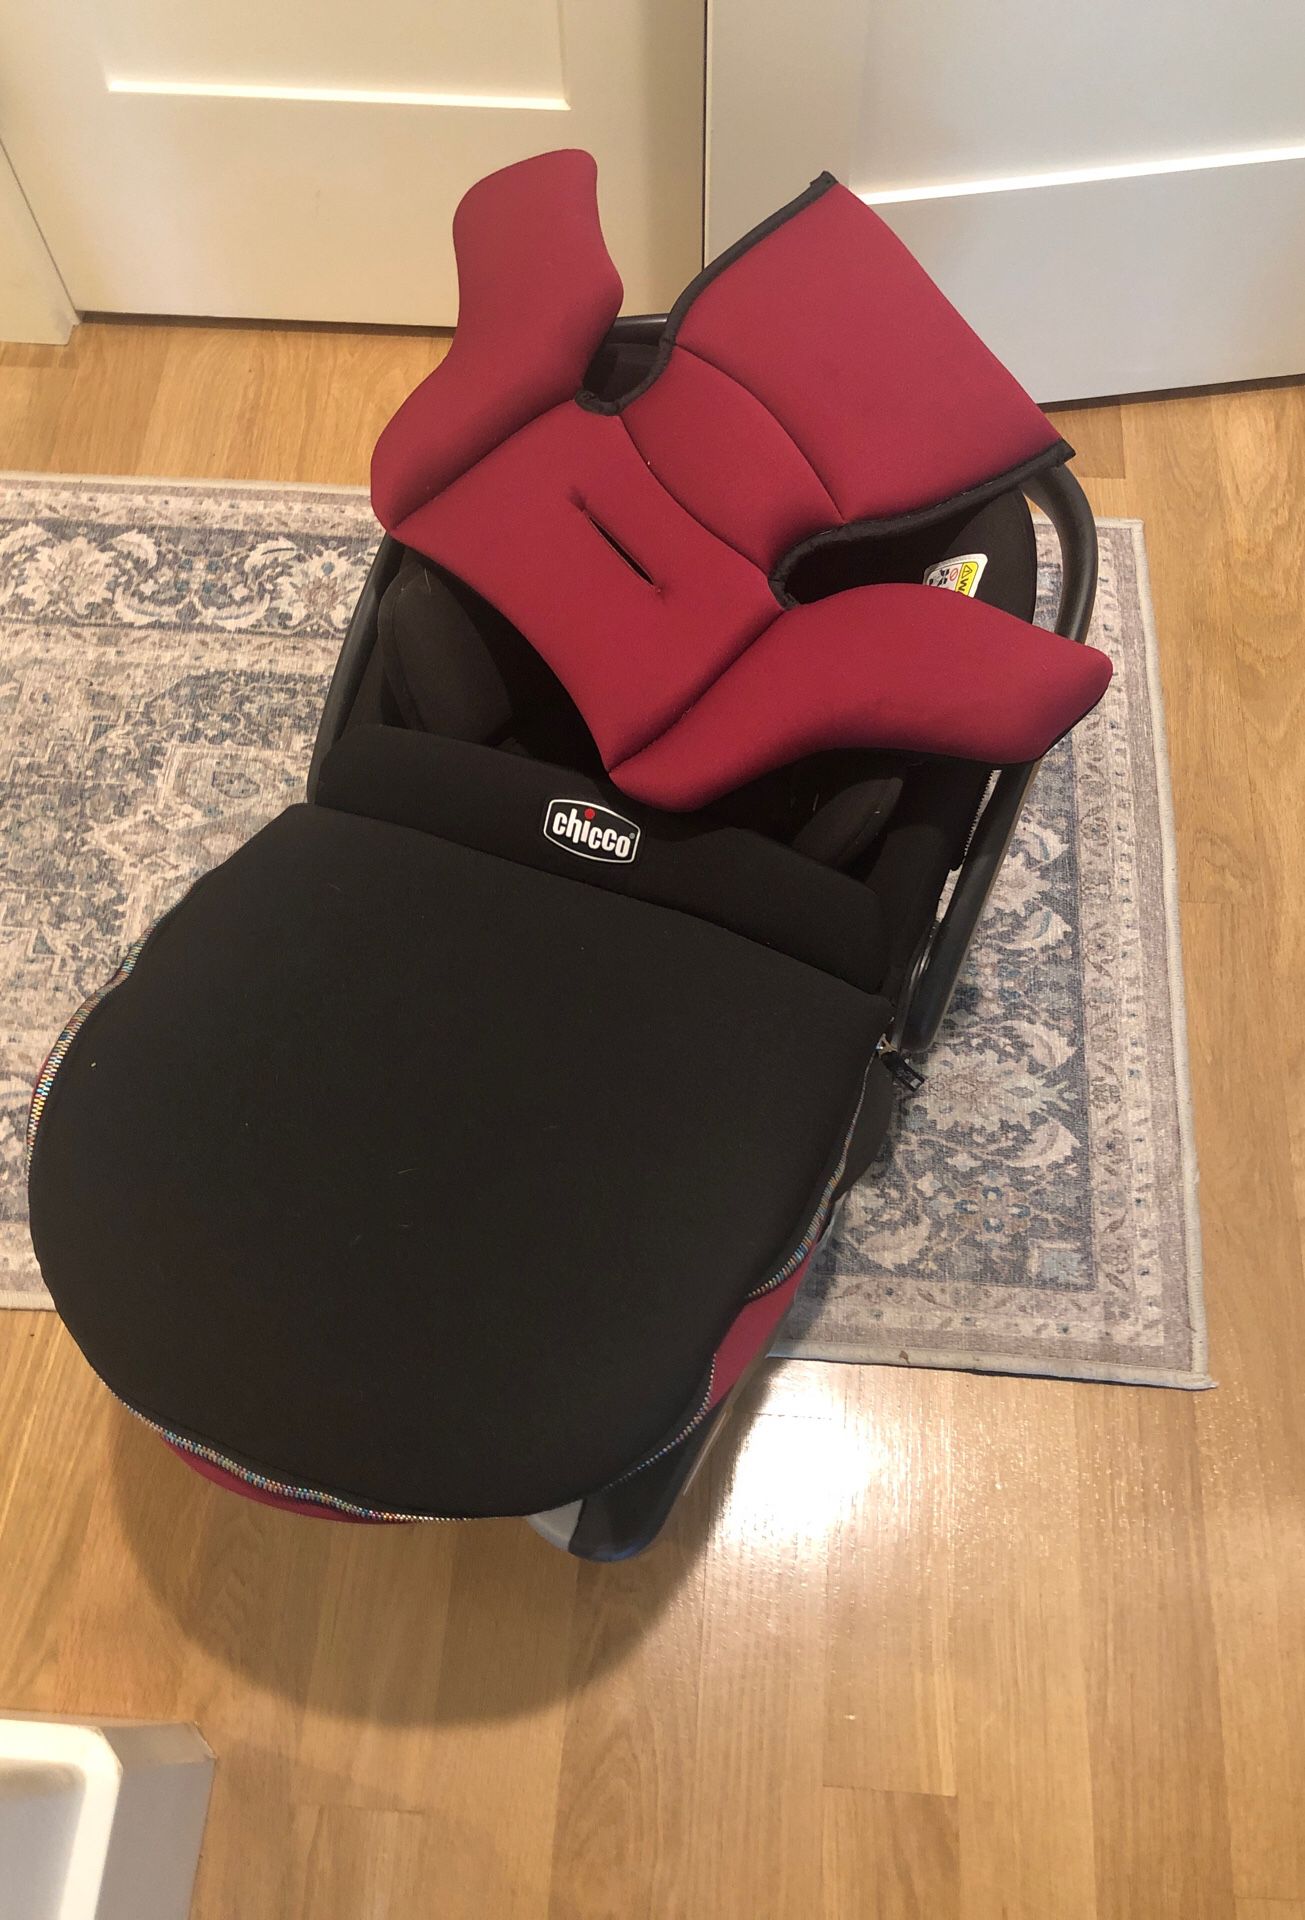 Free Chicco Infant Car Seat and Base